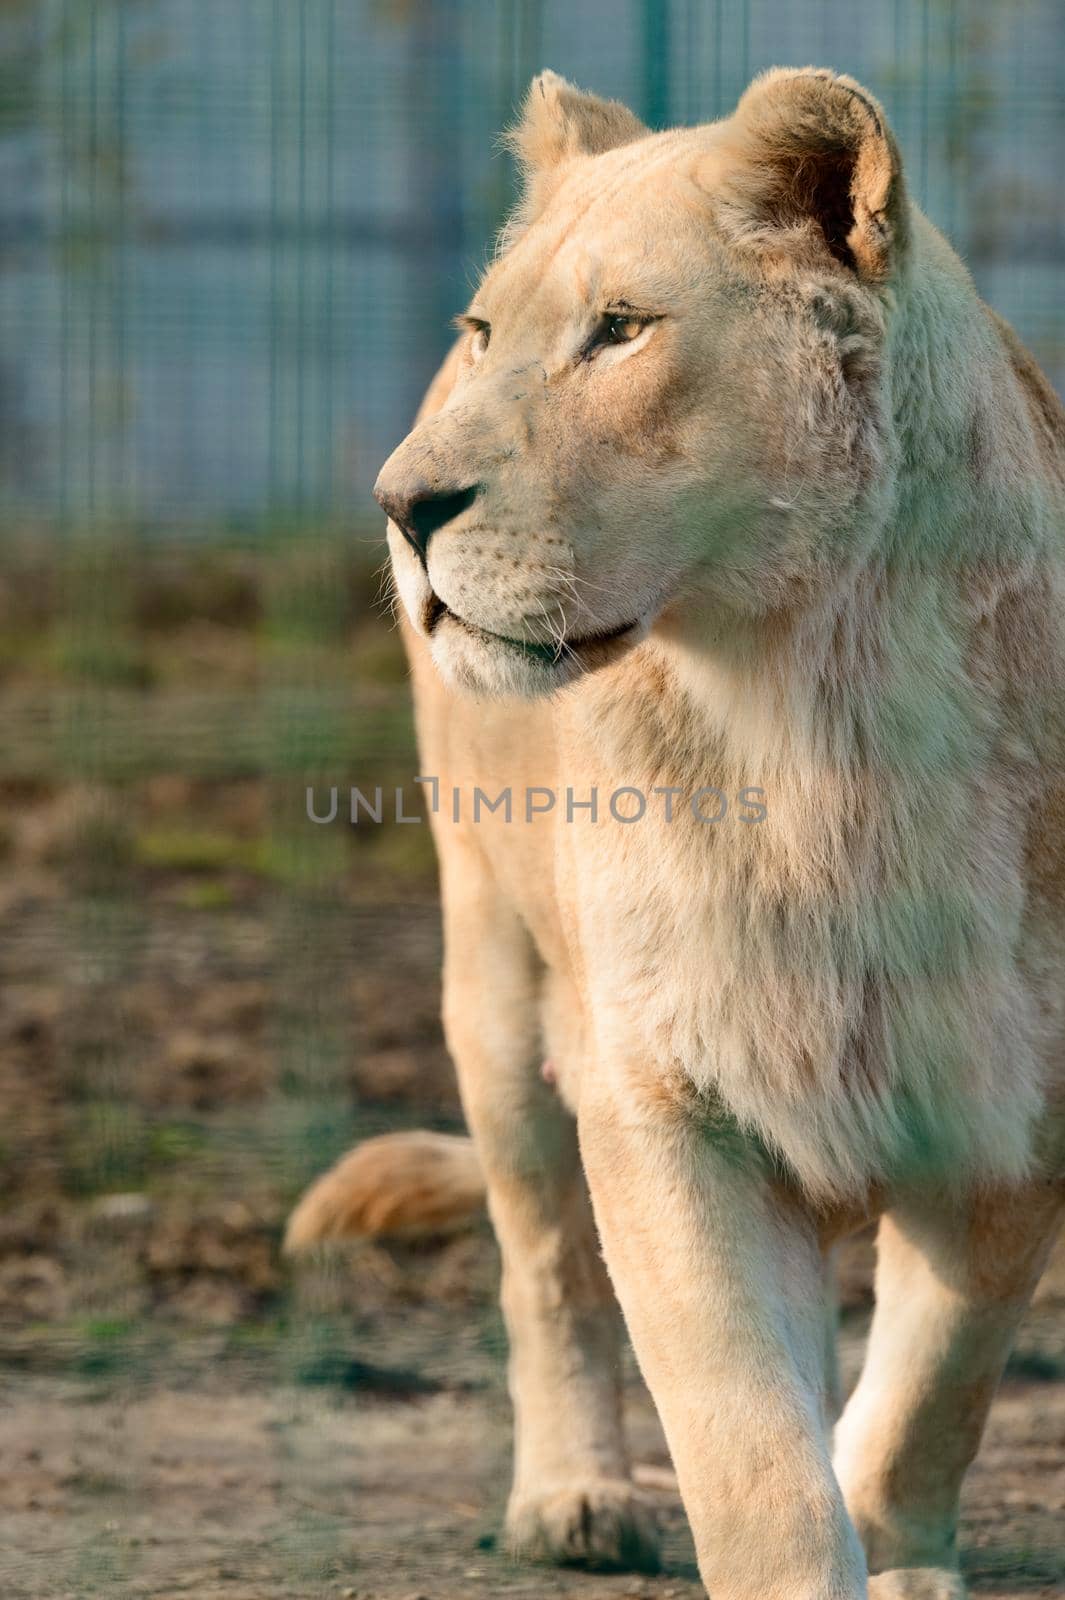 Rare and endangered species of white lions, the zoo and animal life in it, the king.